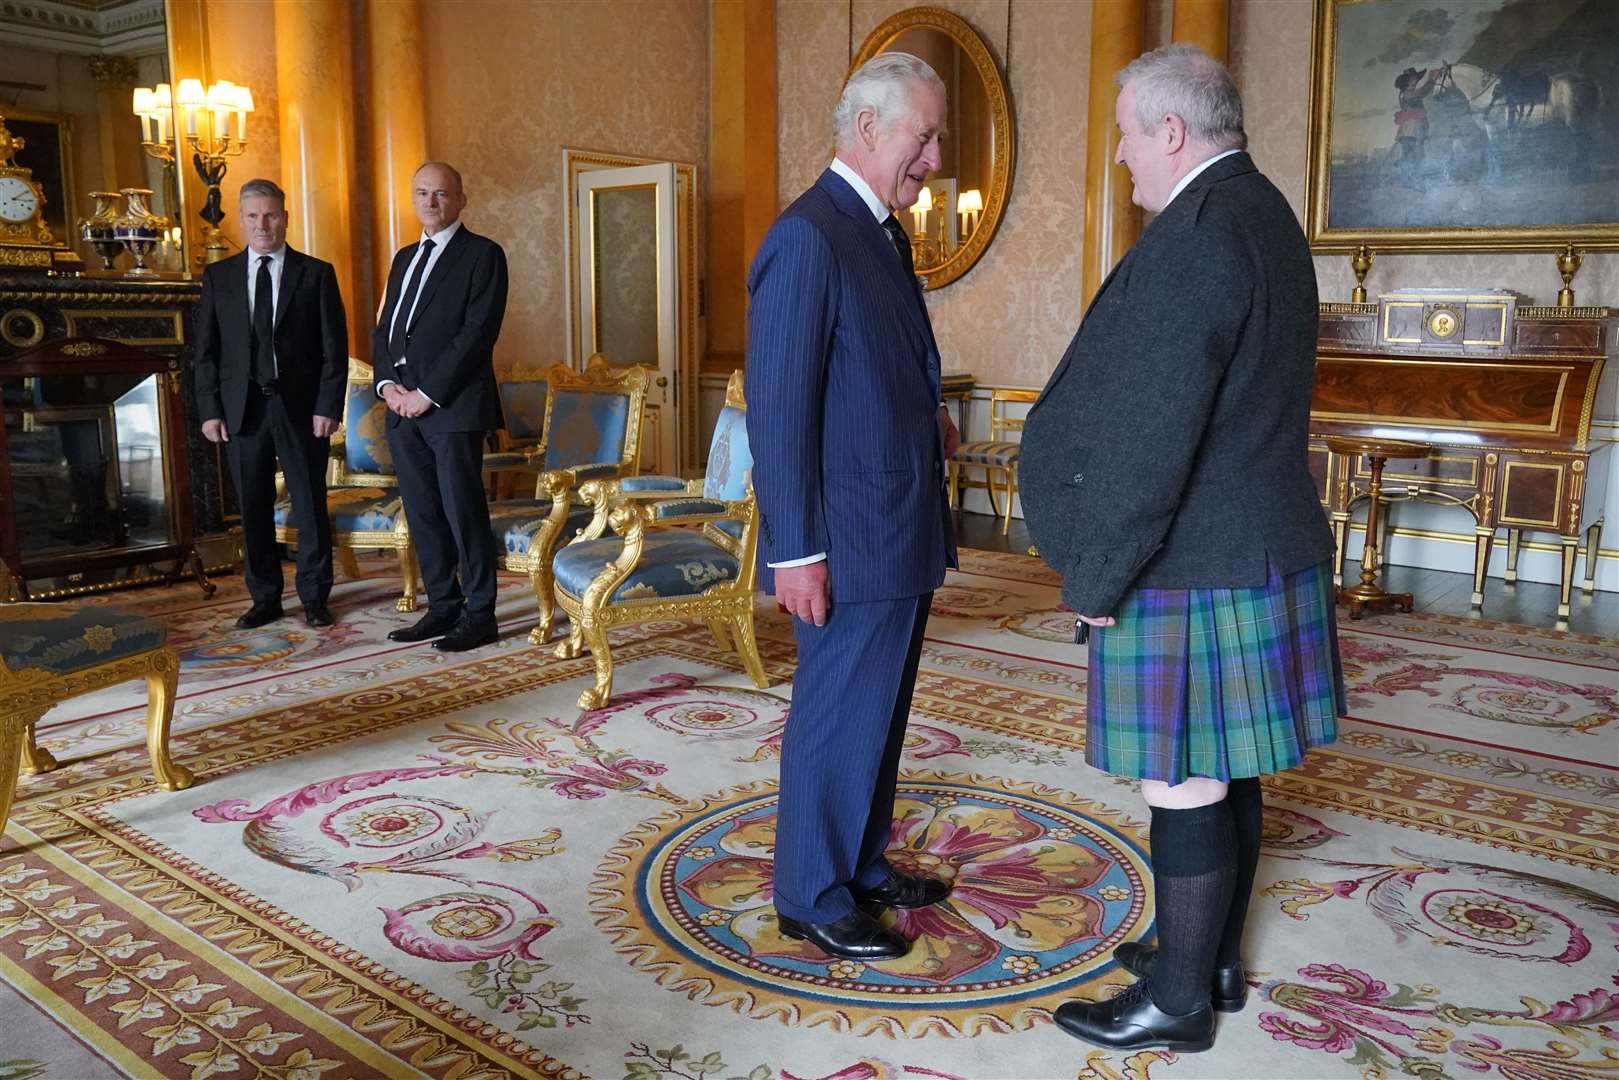 The King speaks with SNP Westminster leader Ian Blackford, watched by Labour leader Sir Keir Starmer (far left) and Liberal Democrat leader Sir Ed Davey during an audience with opposition leaders in the 1844 Room, at Buckingham Palace (Jonathan Brady/PA)